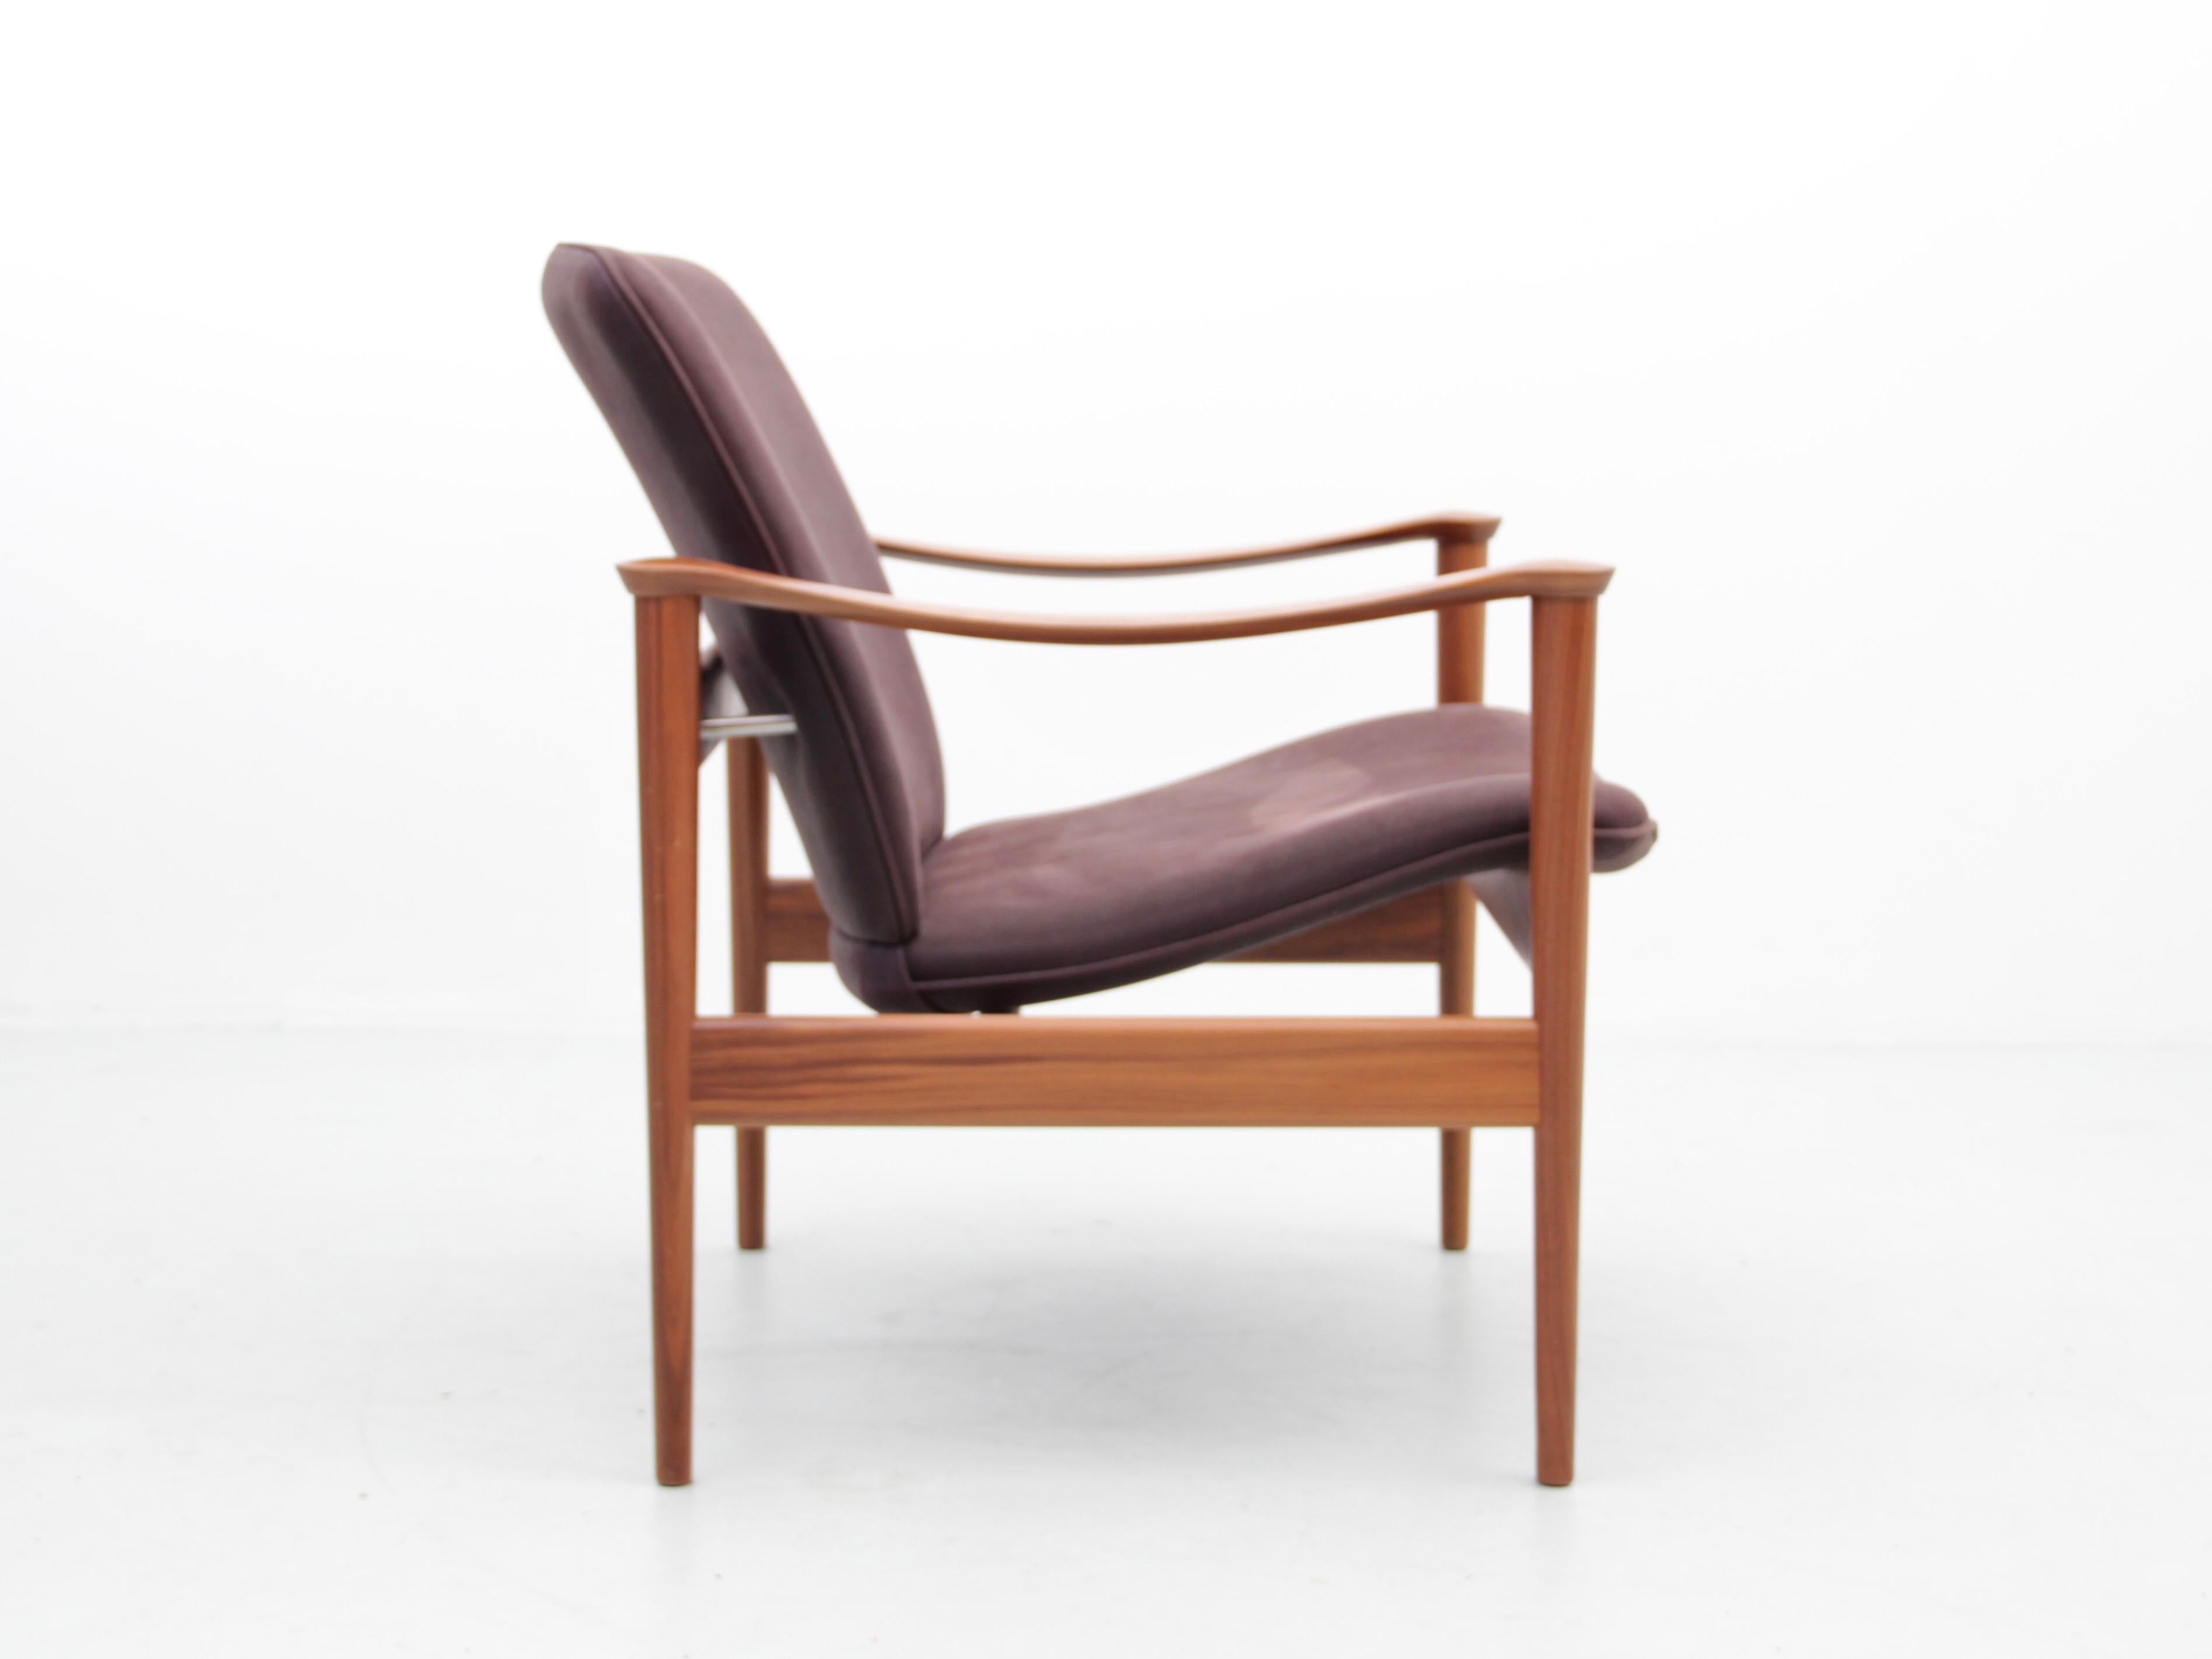 Mid-Century Modern scandinavian 711 lounge.chair by Fredrik Kayser. New edition. Designed in 1960 by Fredrik A. Kayser, it is now reissued by the Norwegian manufacturer Hjelle.
Model on pictures is in walnut and Dune leather. Available finish: oak